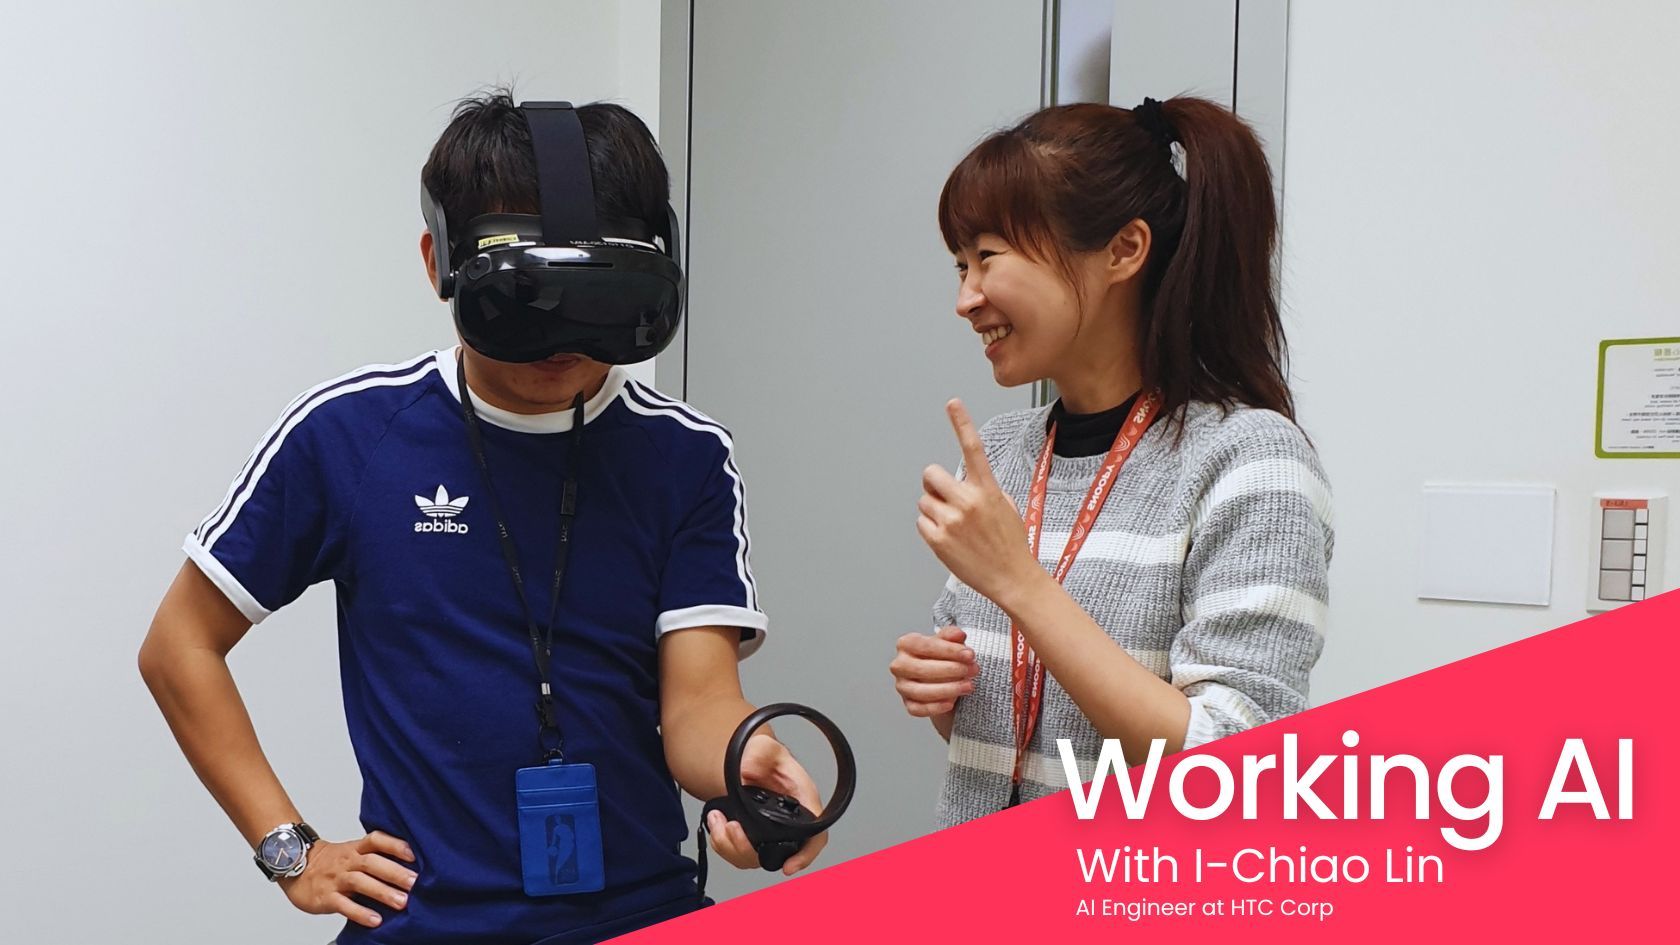 I-Chiao Lin pictured with another person using a VR headset